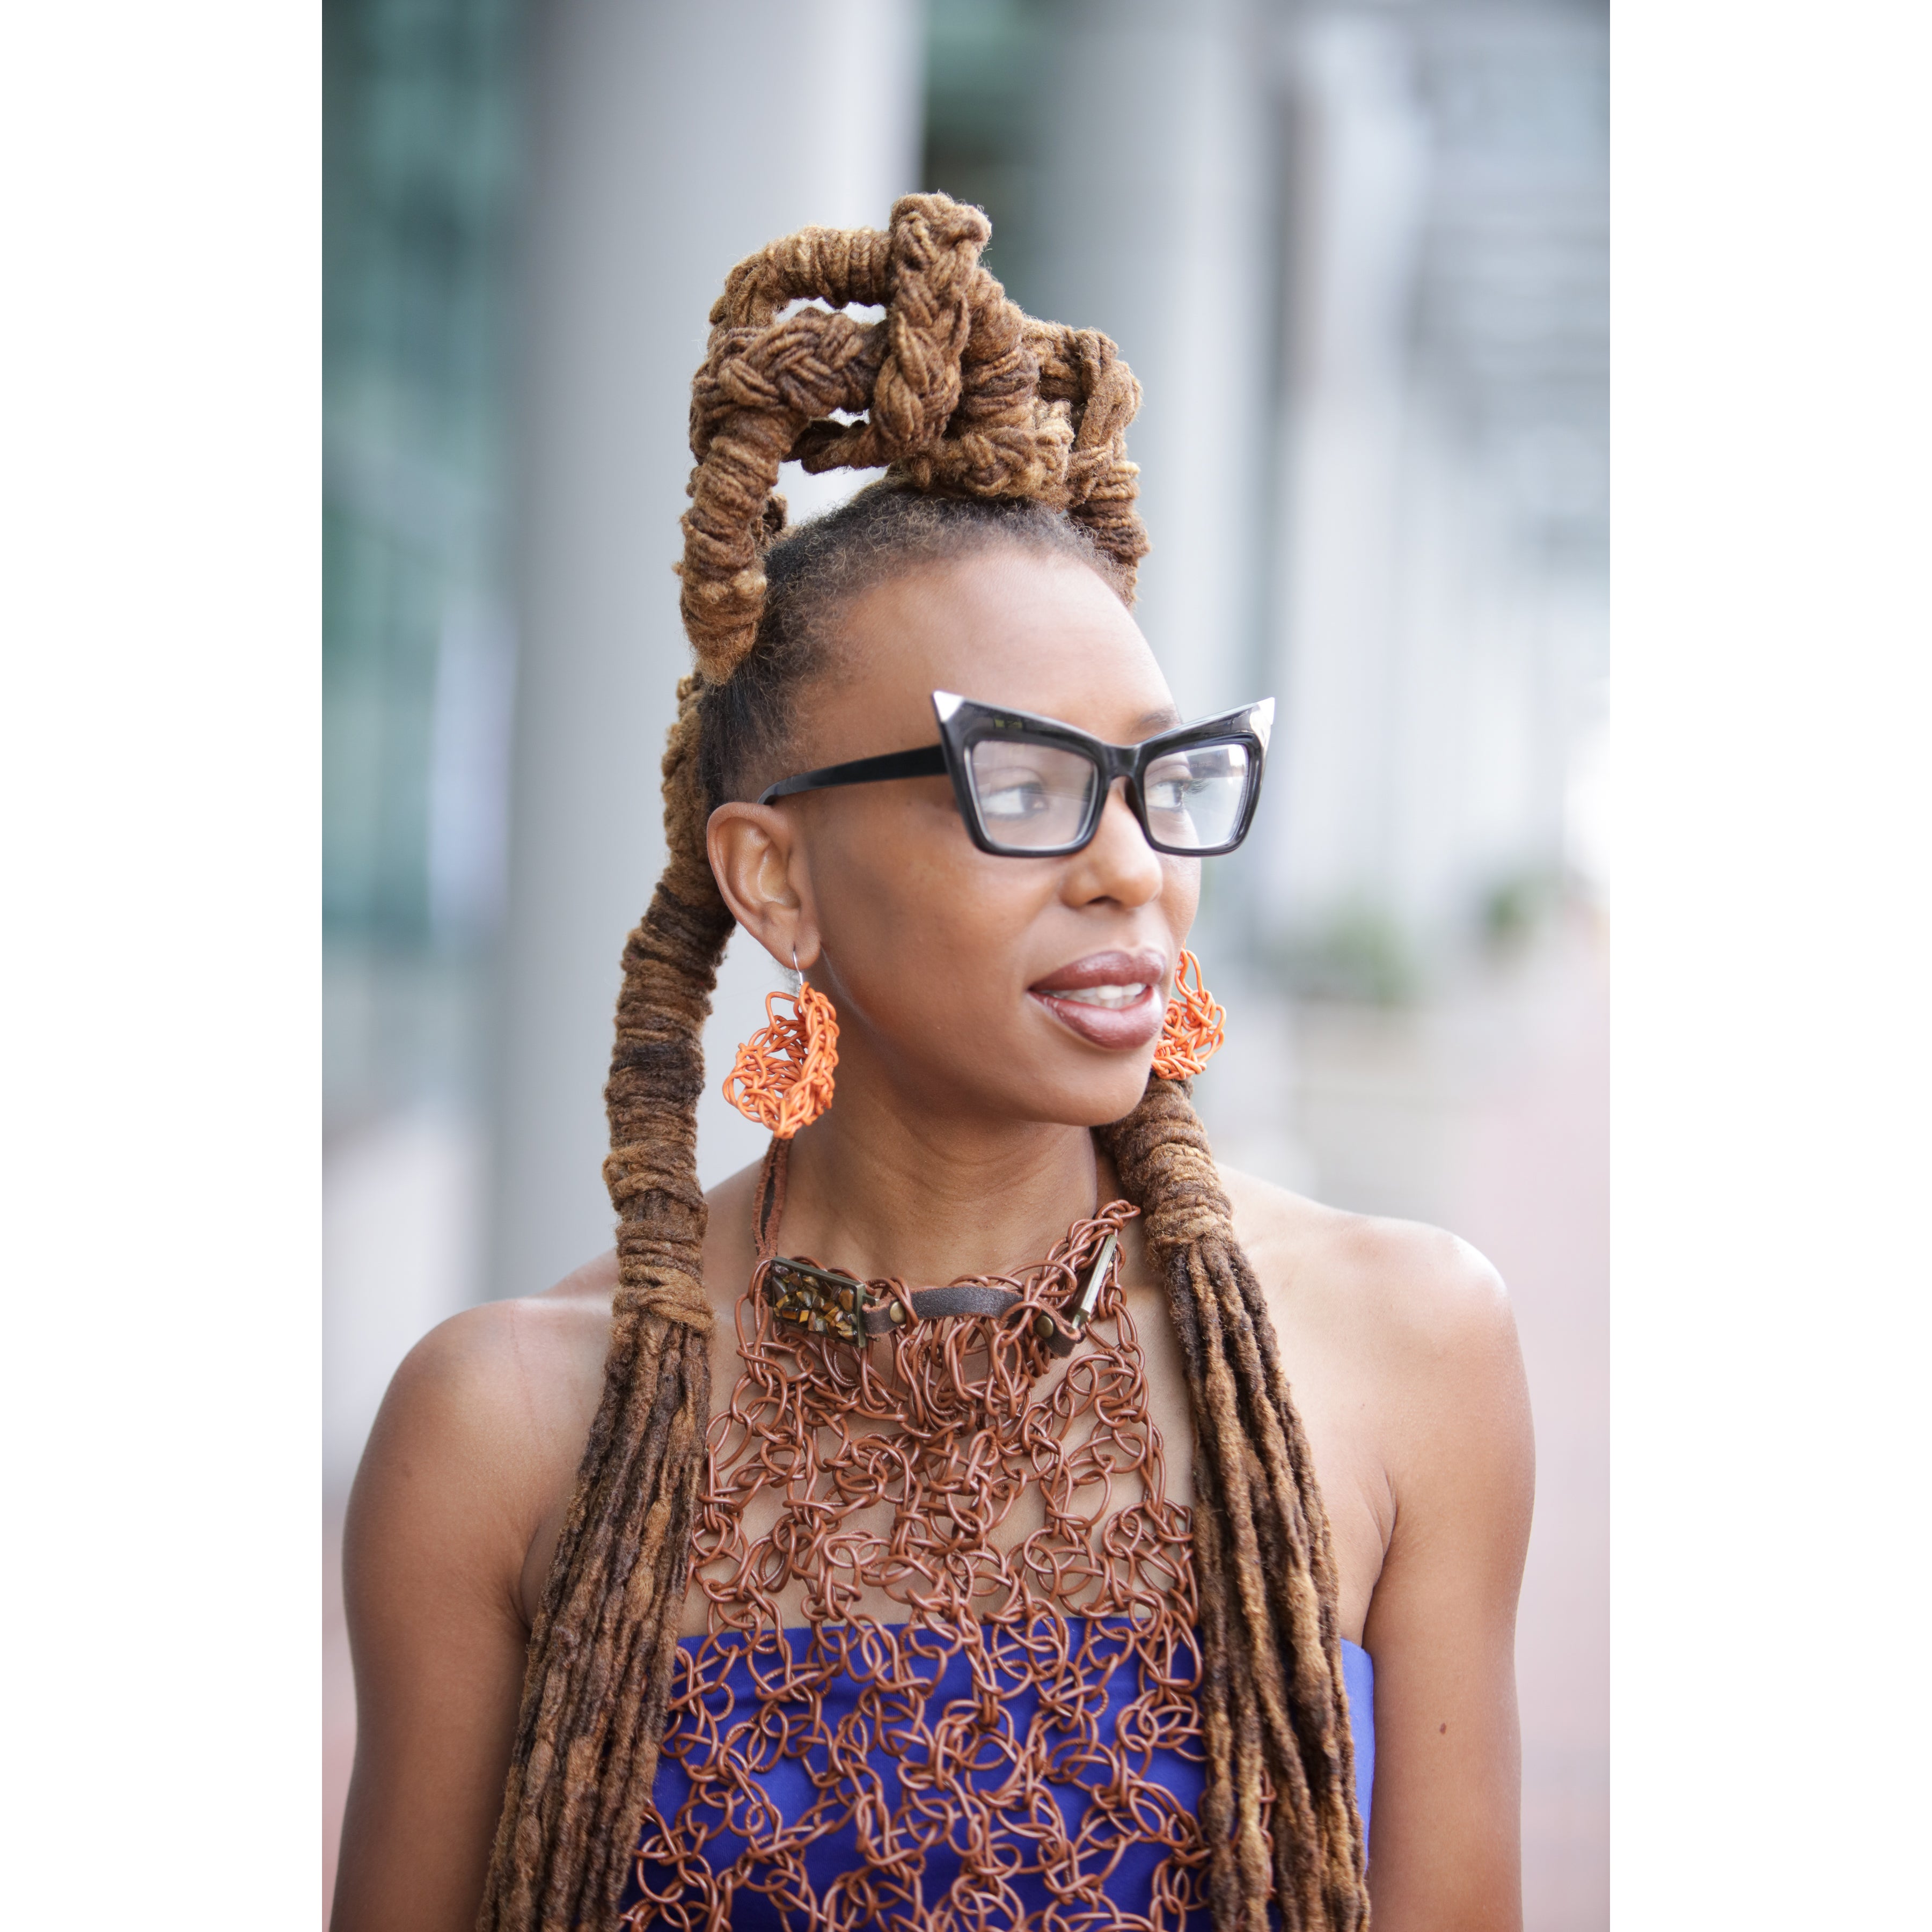 The Most Beautiful Hairstyles at Essence Festival 2016
